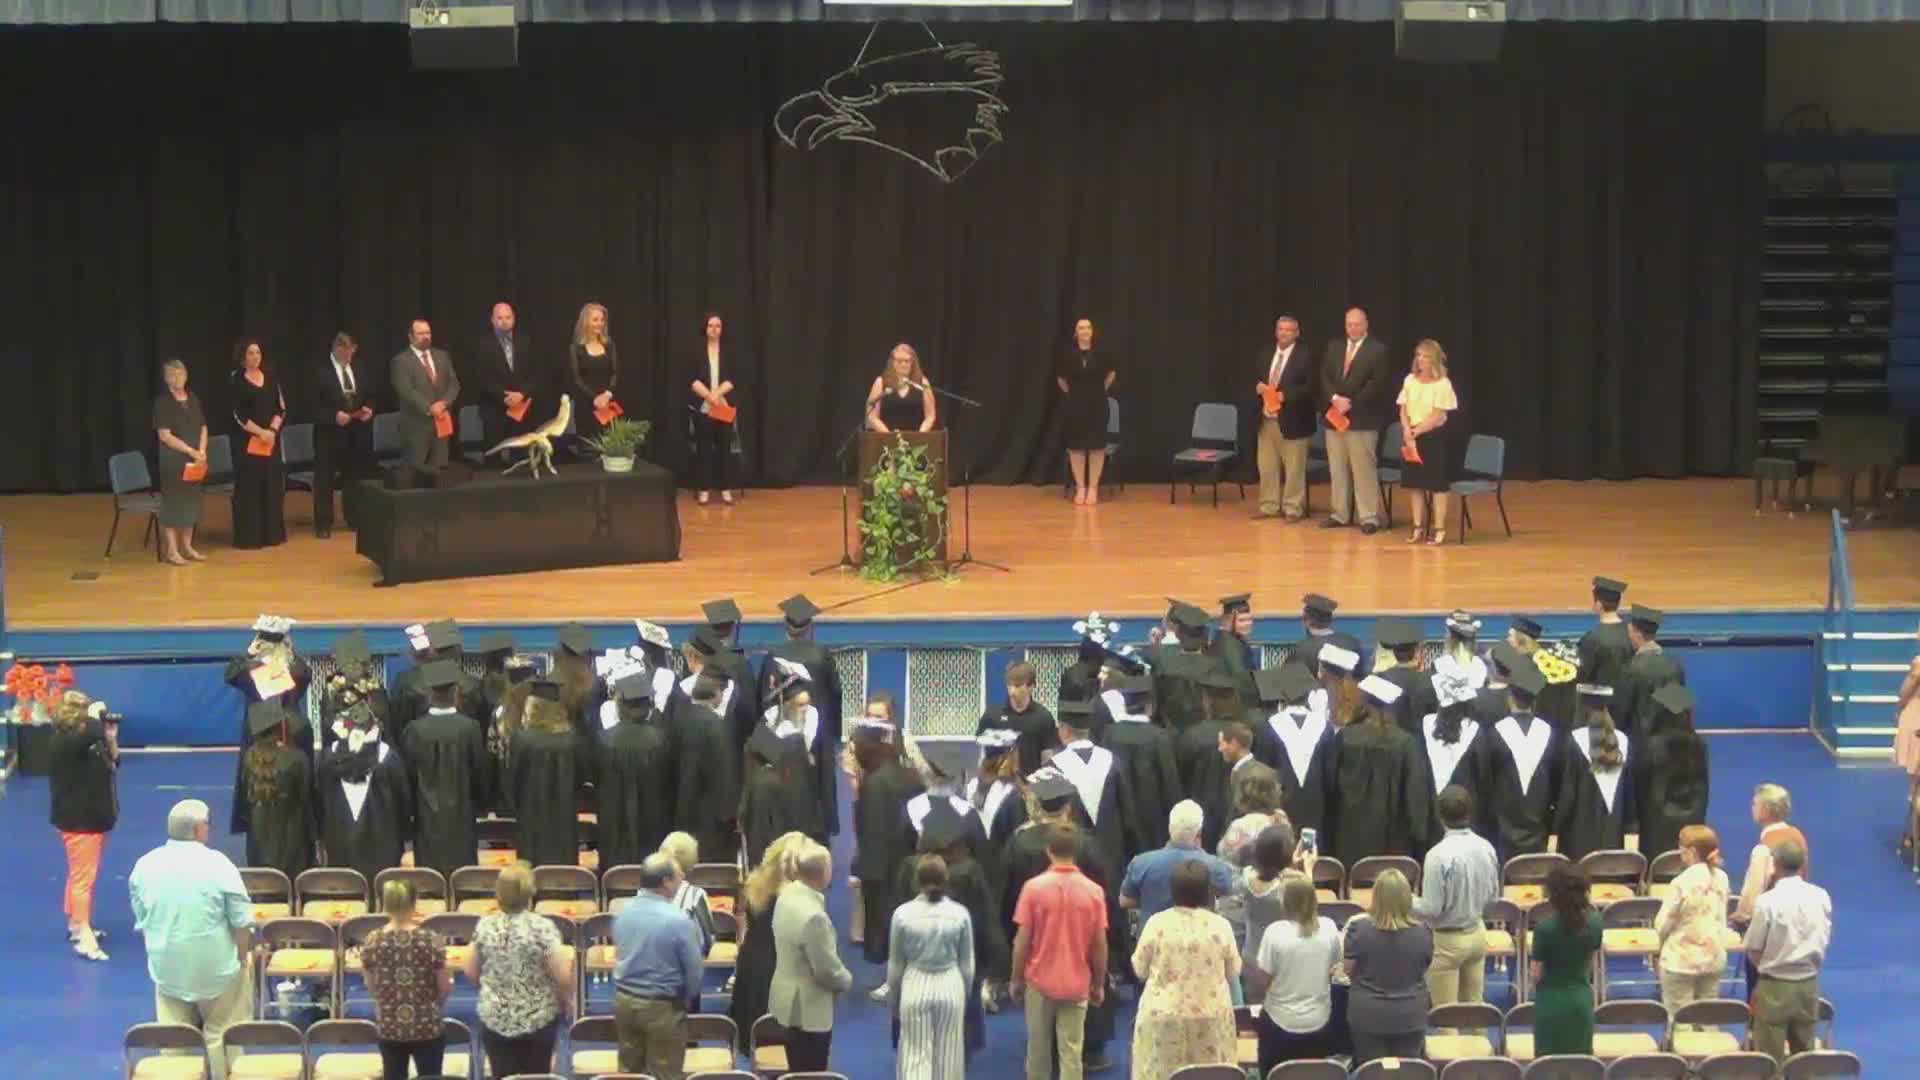 Colby High School Class of 21 Graduation | General | OpenSpacesSports7